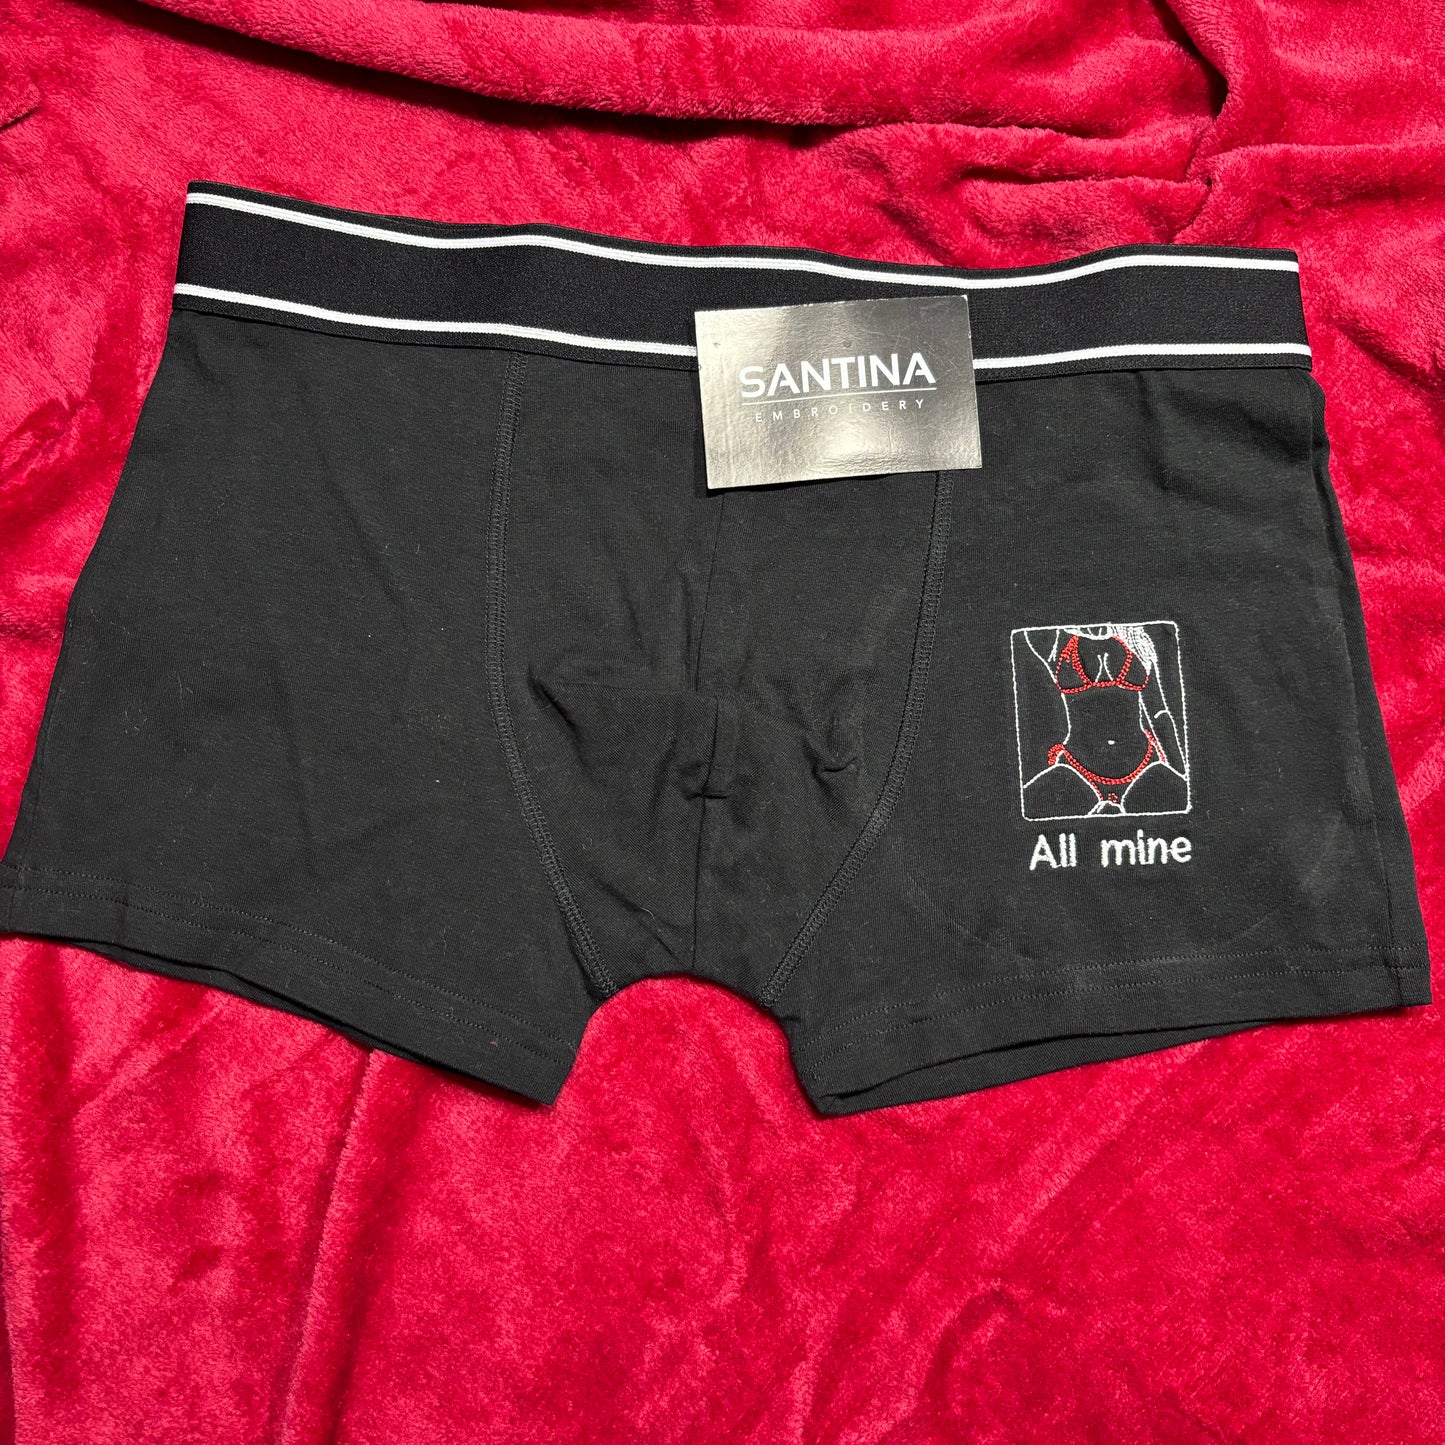 Spicy embroidered men’s boxer shorts.